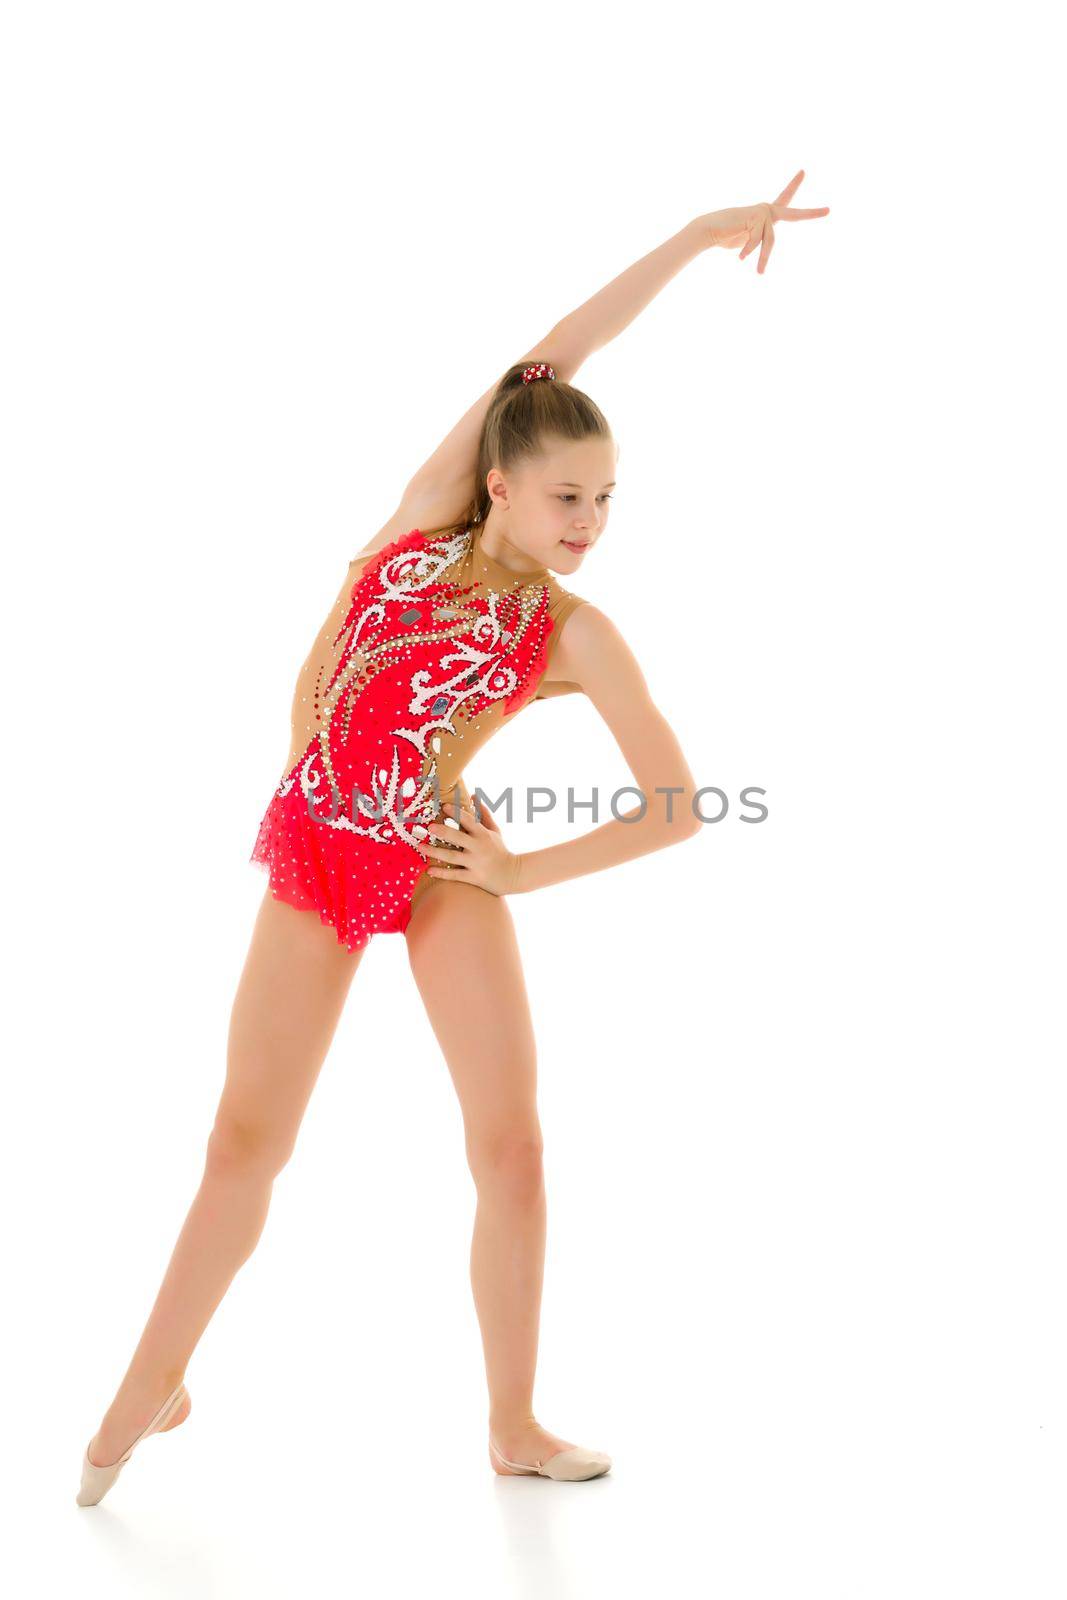 Cute little girl gymnast getting ready to perform a difficult exercise. by kolesnikov_studio